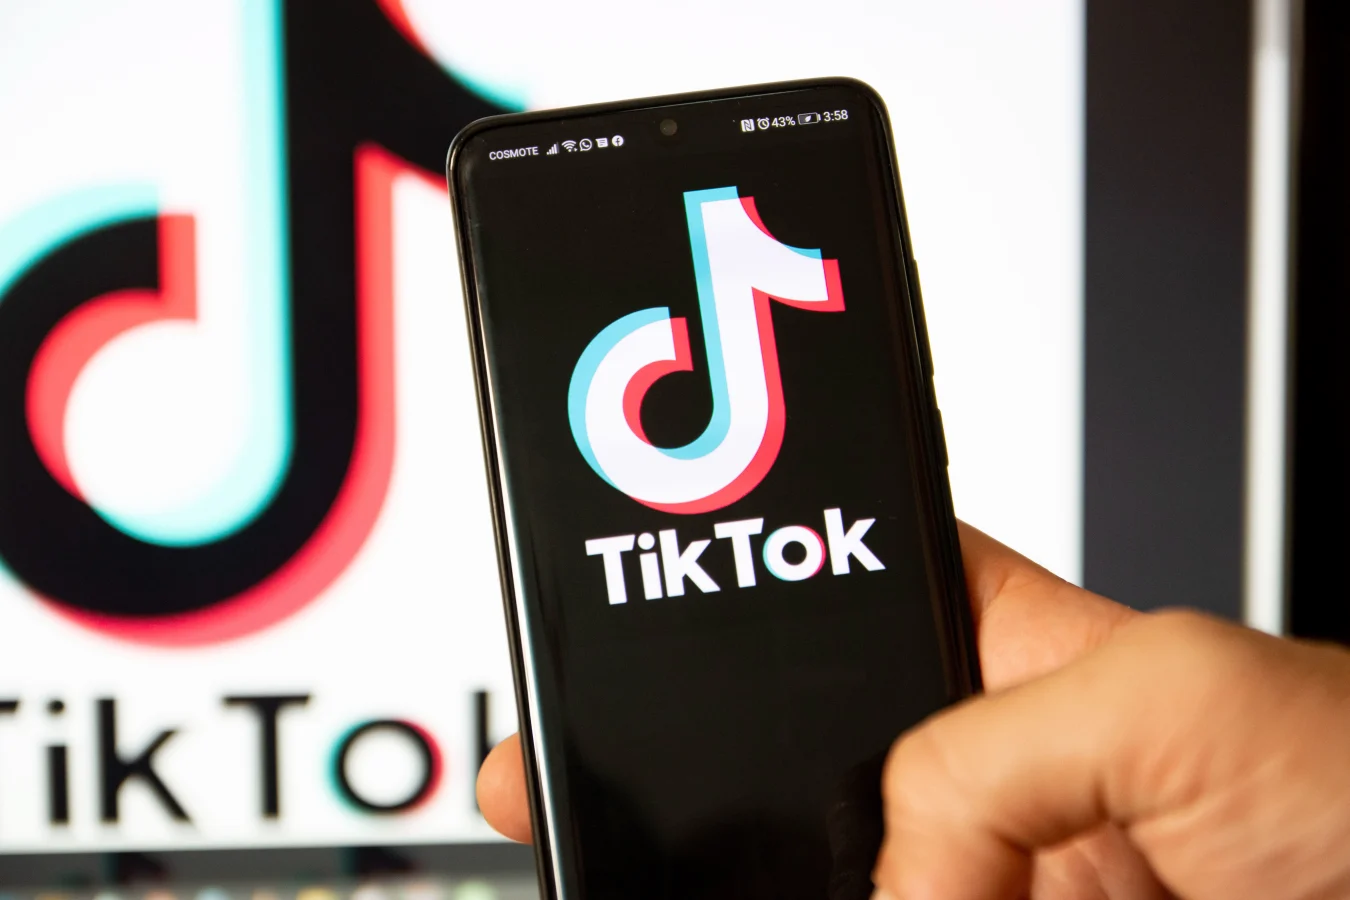 TikTok closeup logo displayed on a phone screen, smartphone and keyboard are seen in this multiple exposure illustration. Tik Tok is a Chinese video-sharing social networking service owned by a Beijing based internet technology company, ByteDance.  It is used to create short dance, lip-sync, comedy and talent videos. ByteDance launched TikTok app for iOS and Android in 2017 and earlier in September 2016 Douyin fror the market in China. TikTok became the most downloaded app in the US in October 2018. President of the USA Donald Trump is threatening and planning to ban the popular video sharing app TikTok from the US because of the security risk. Thessaloniki, Greece - August 1, 2020 (Photo by Nicolas Economou/NurPhoto via Getty Images)